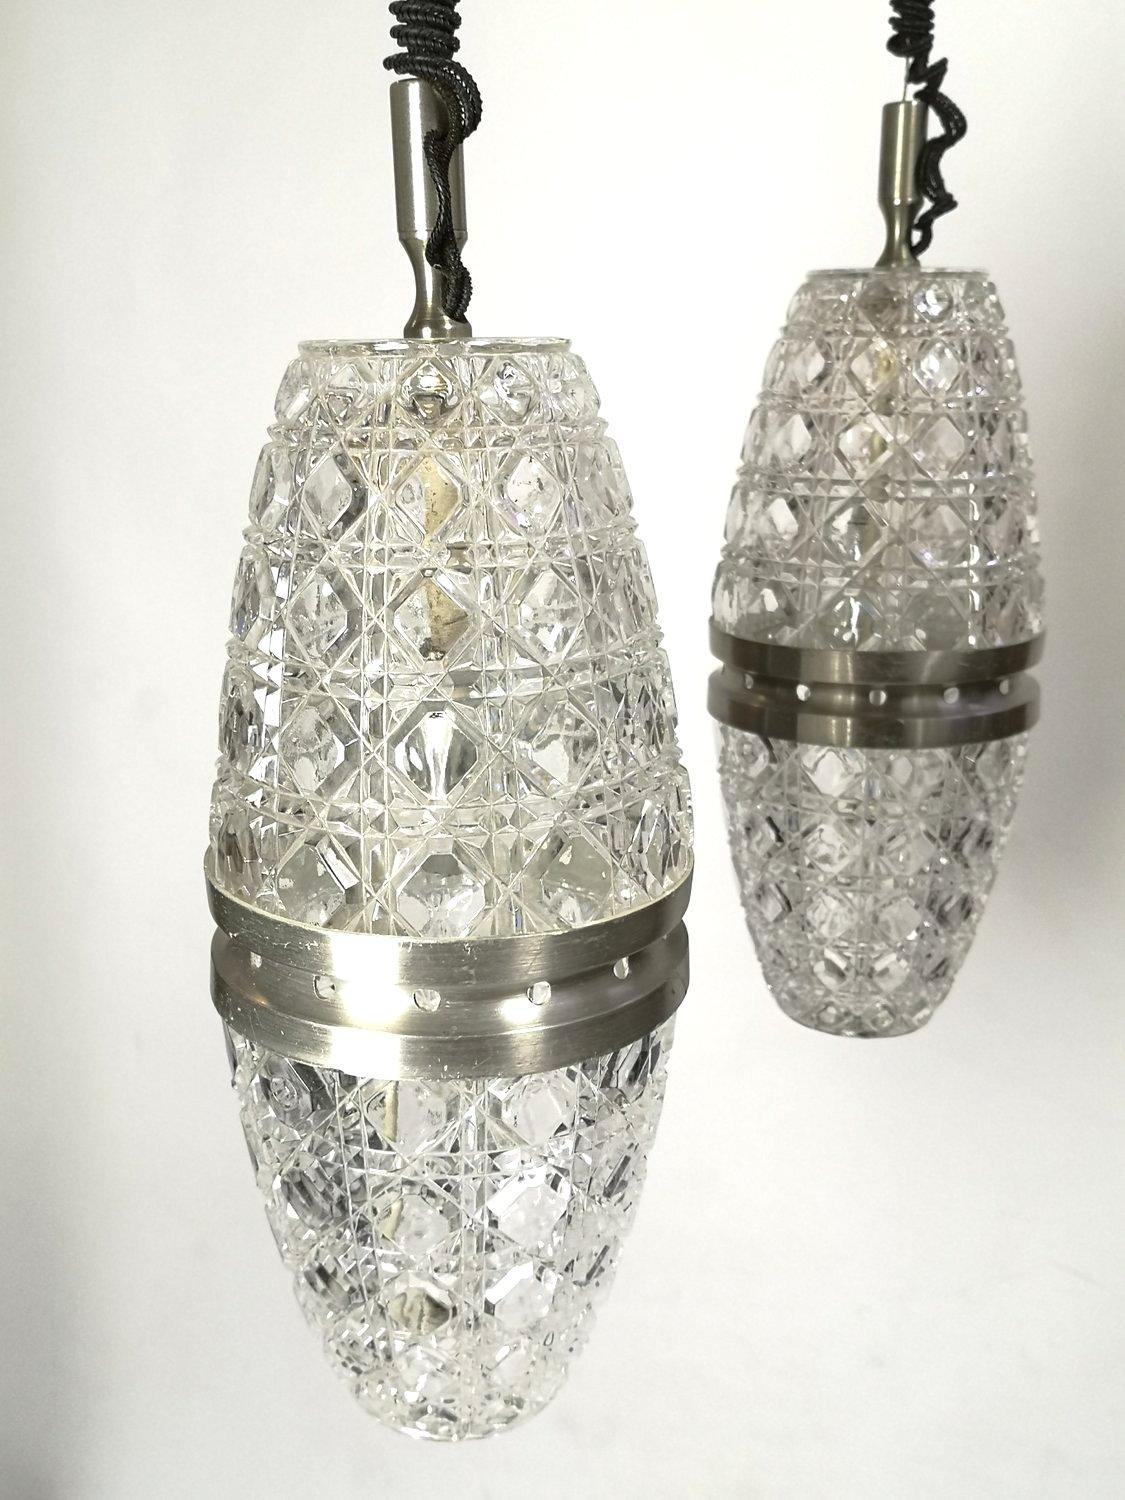 Glass Exquisite Mid-century modern ceiling lamp with crystal light shades (50193) For Sale